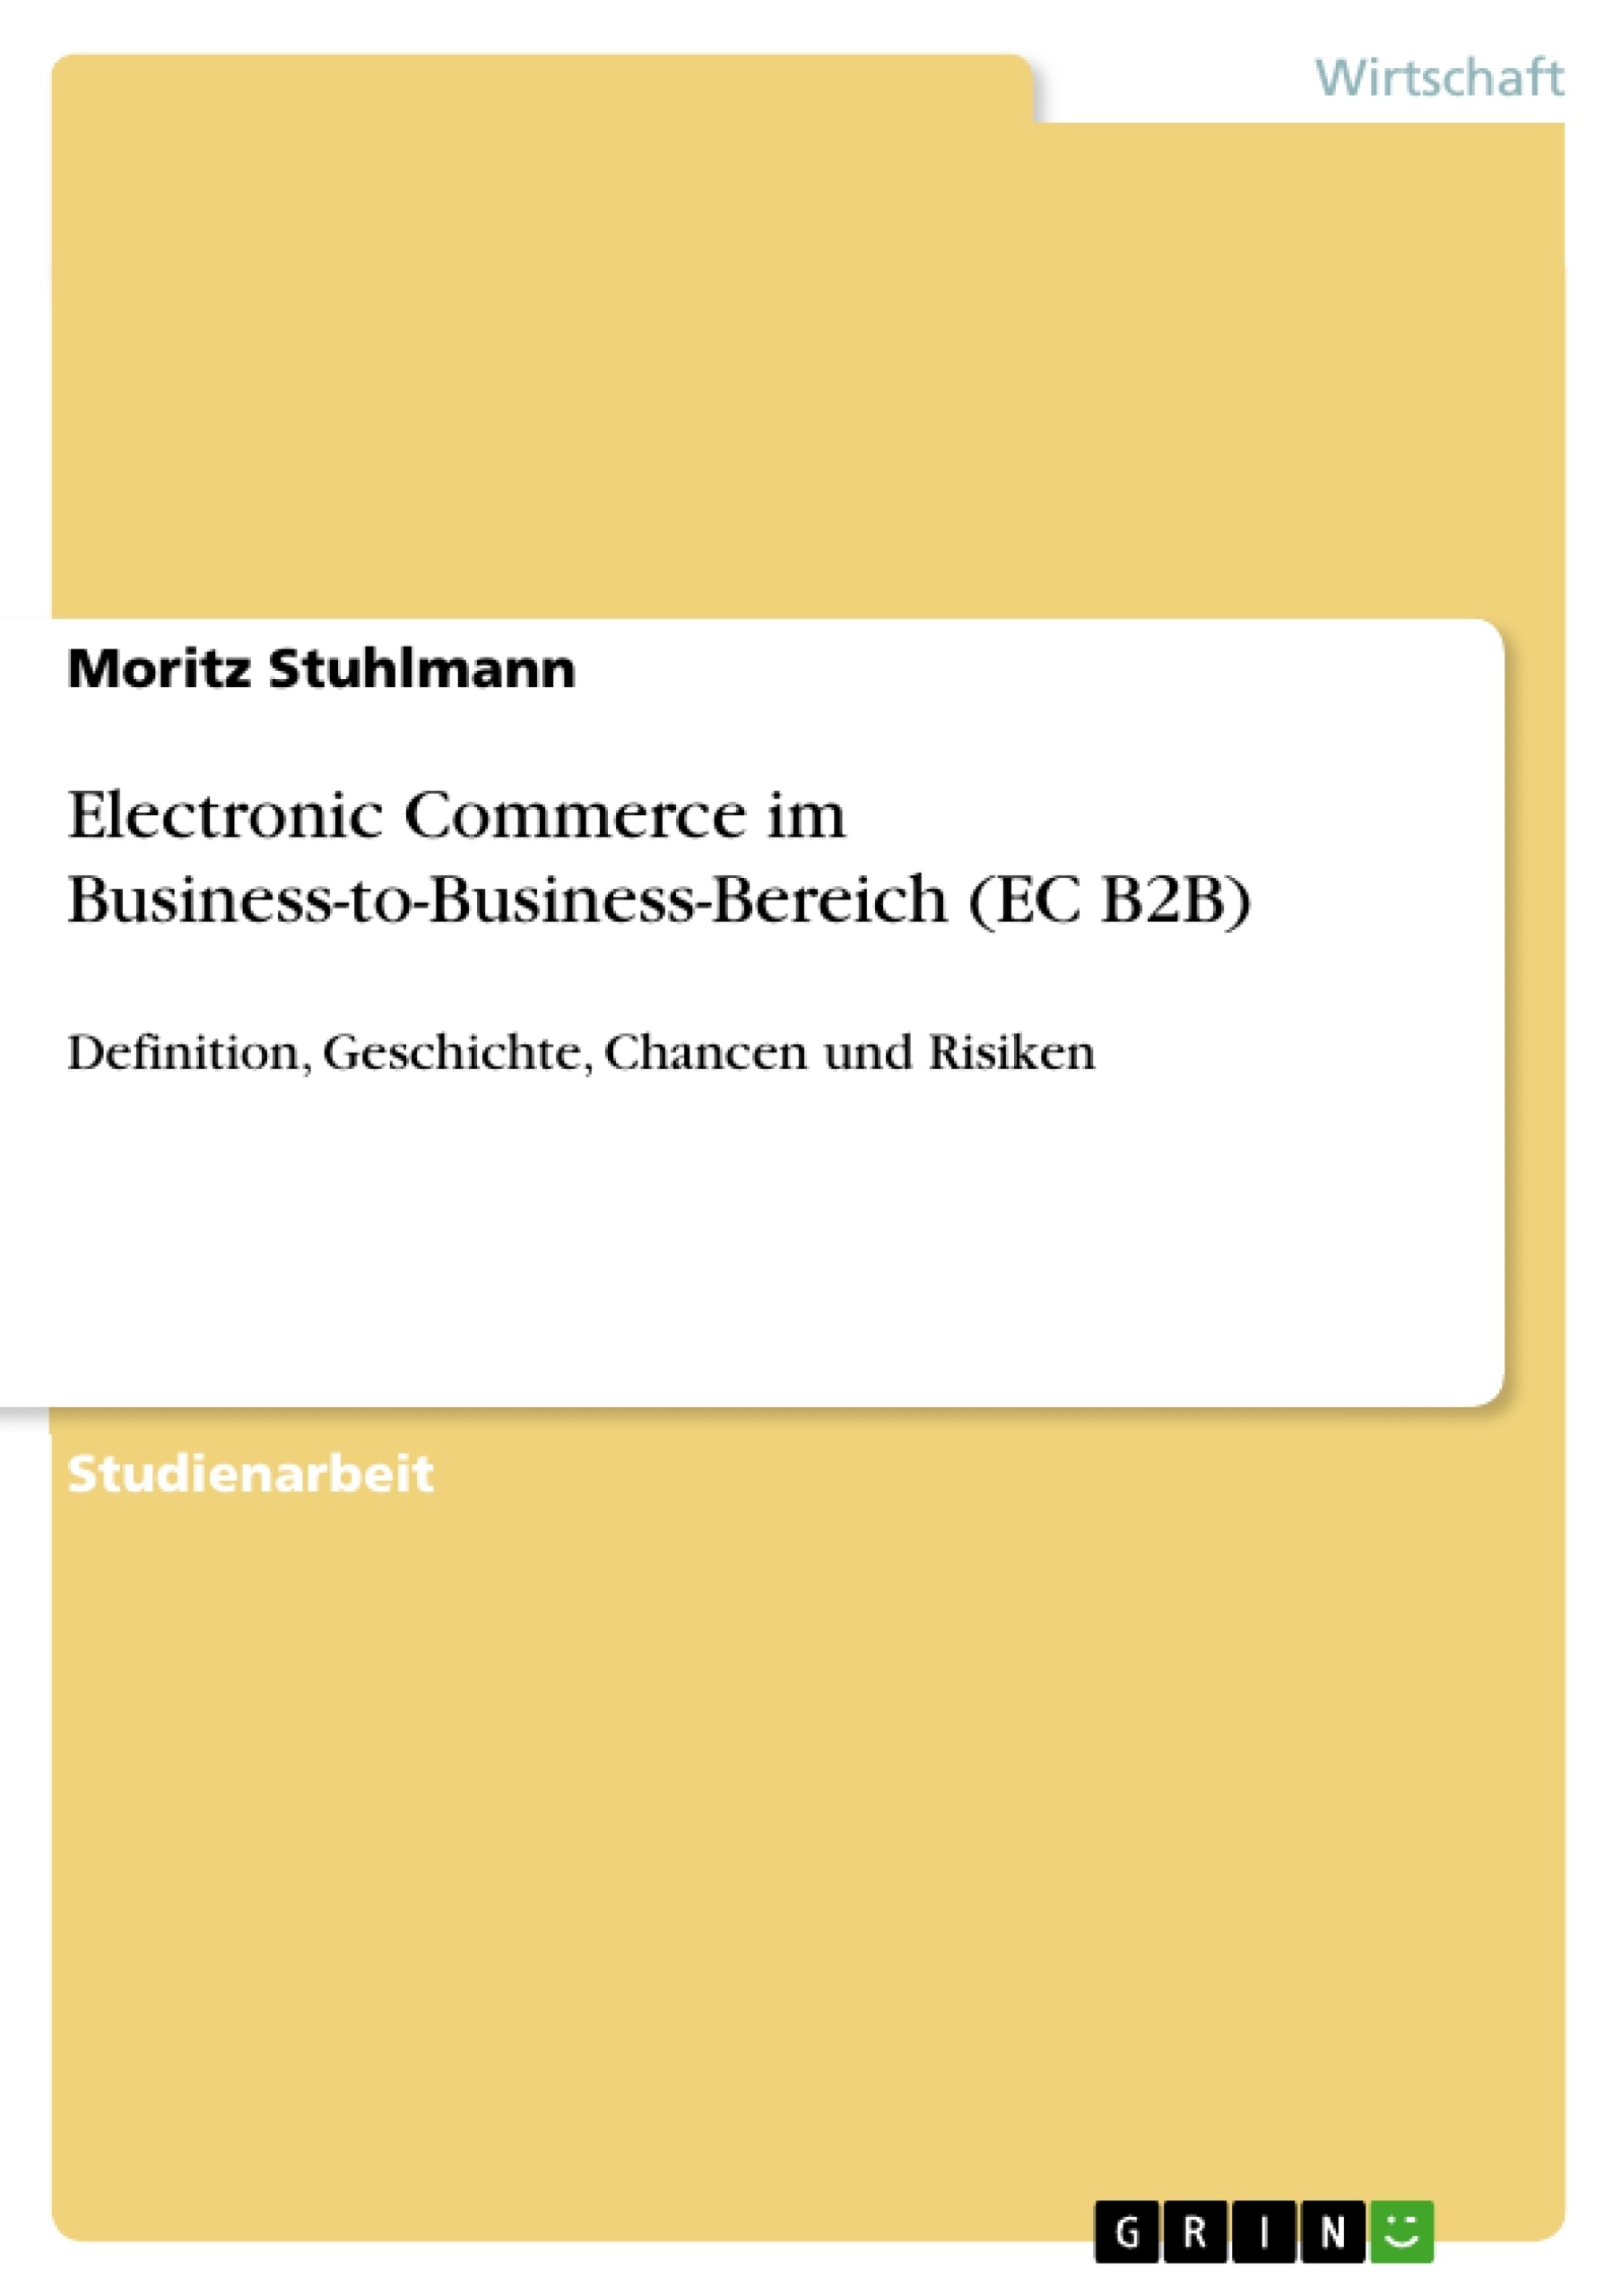 Titel: Electronic Commerce im Business-to-Business-Bereich (EC B2B)